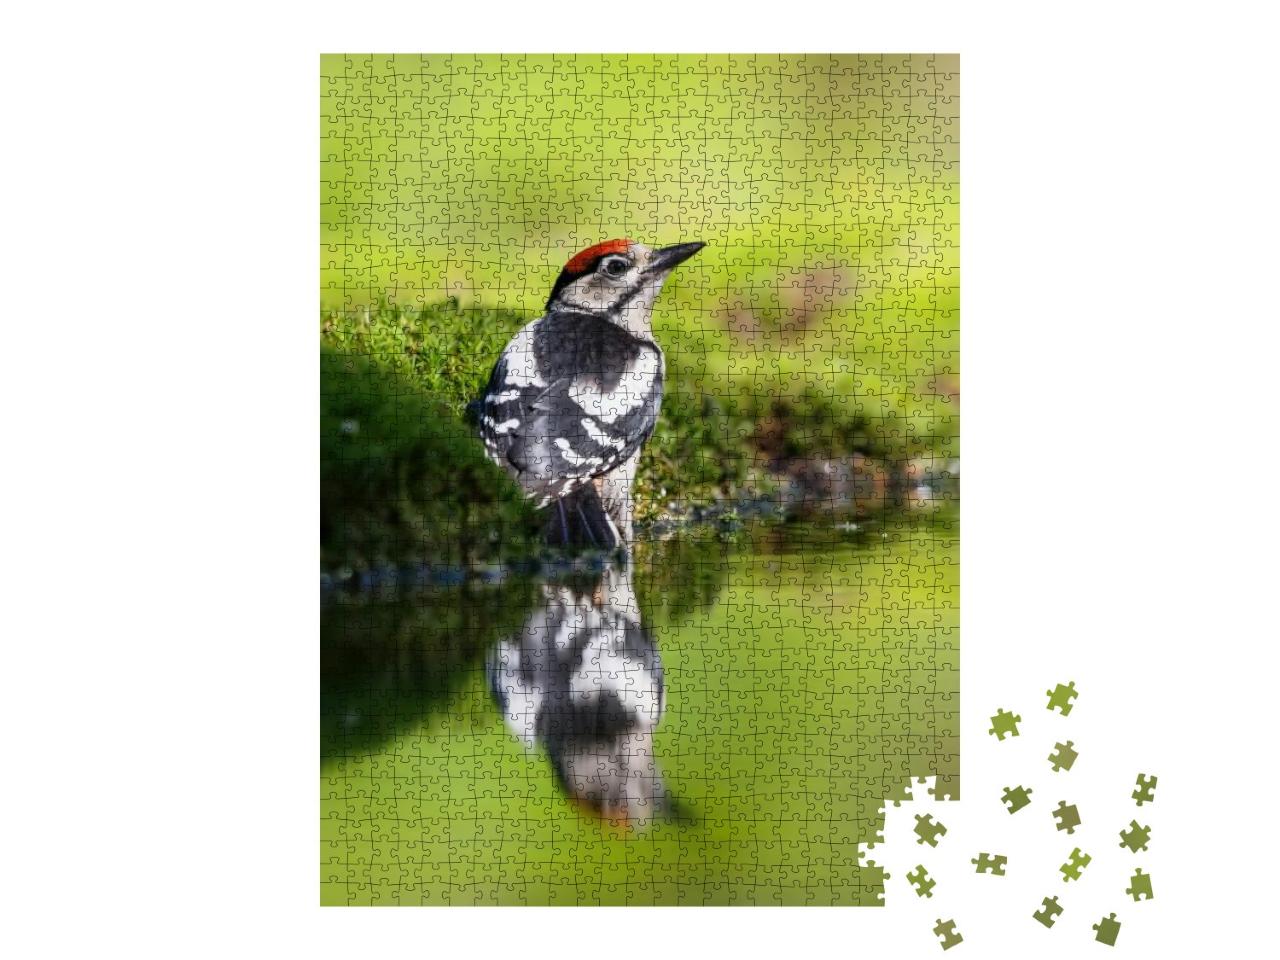 Great Spotted Woodpecker Dendrocopos Major Sitting on the... Jigsaw Puzzle with 1000 pieces